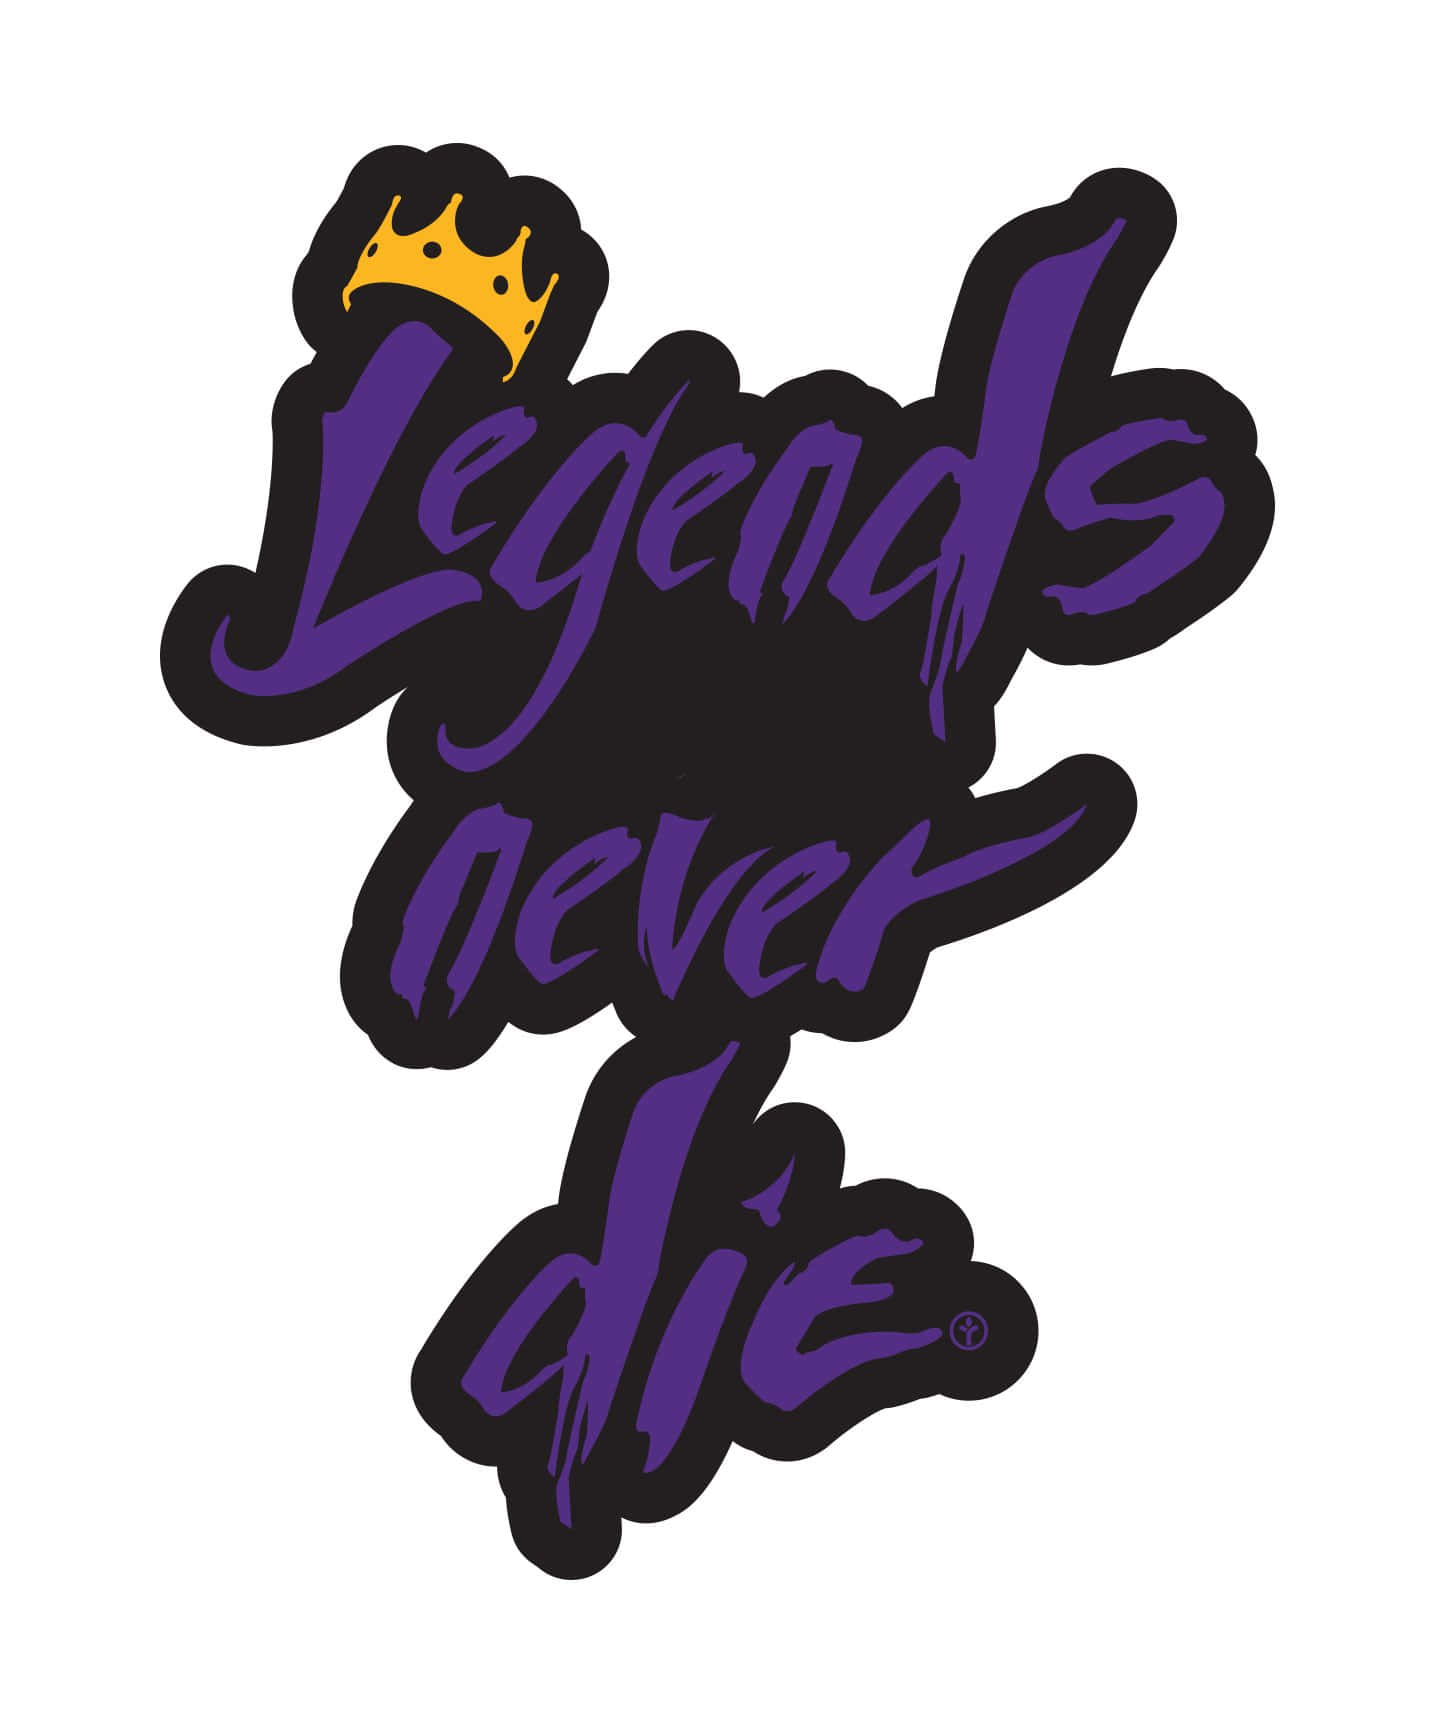 "Legends Never Die - Pledge to honor their memories and keep striving for greatness." Wallpaper